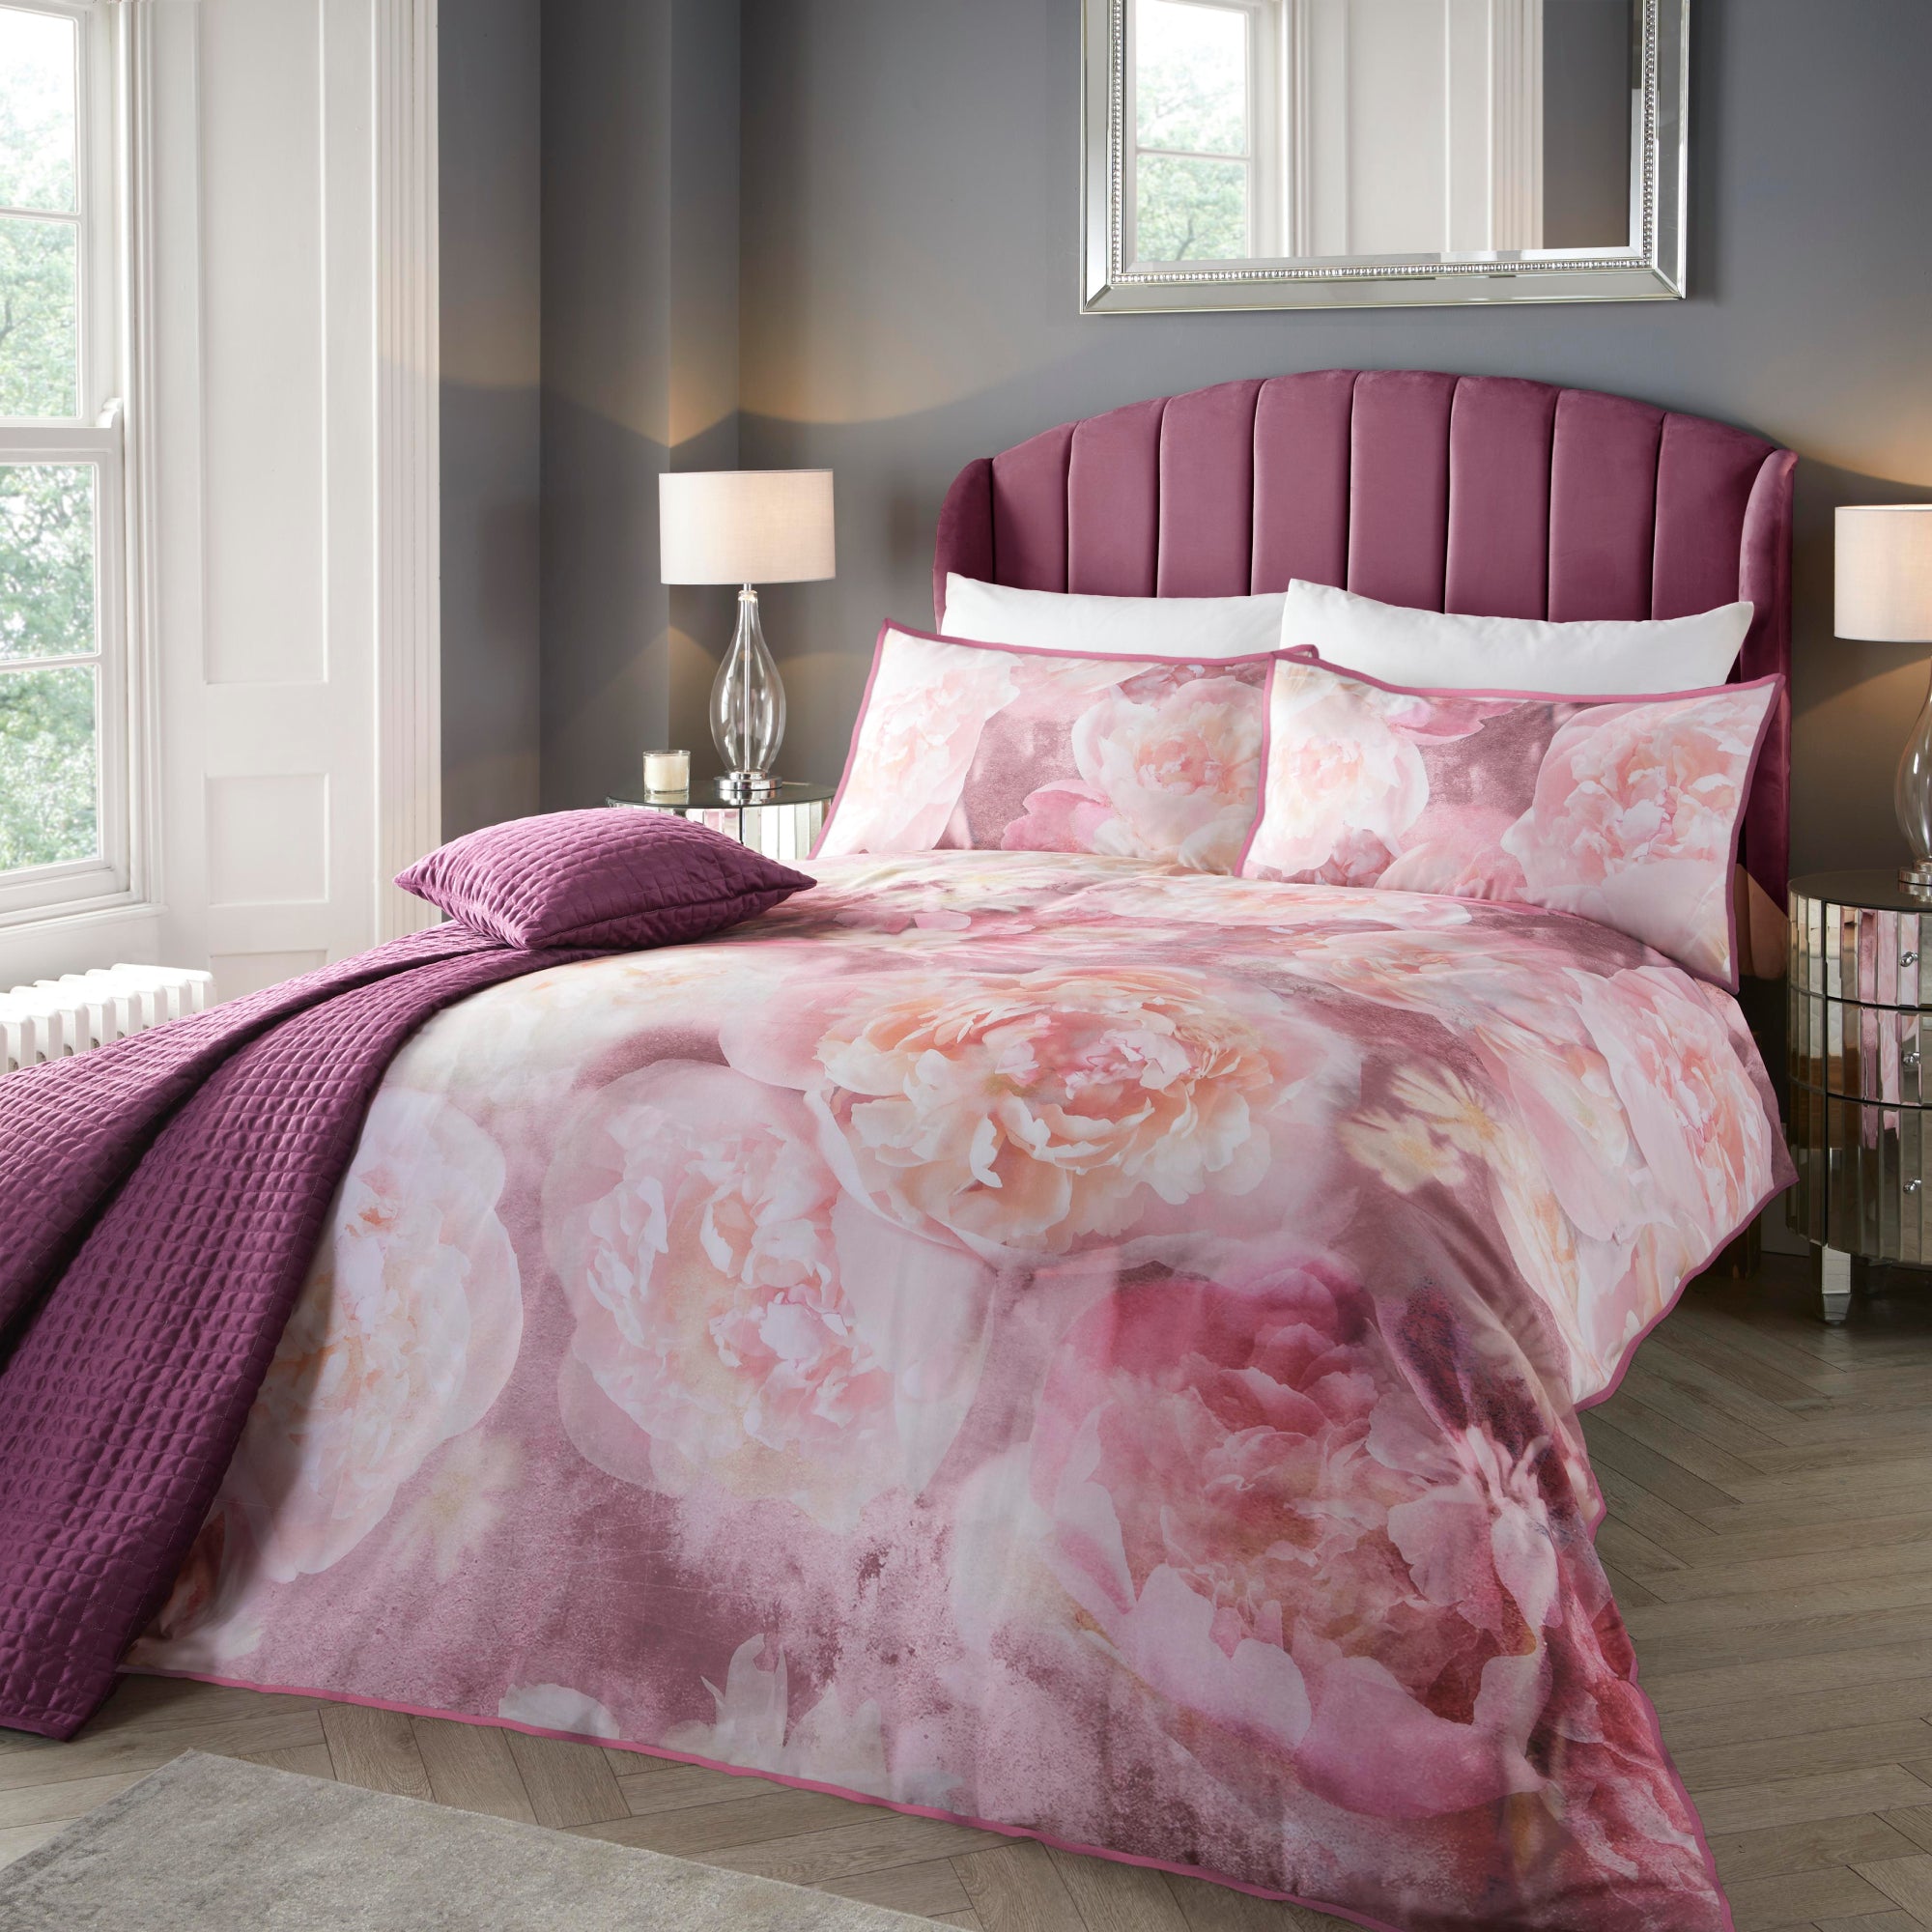 Duvet Cover Set Rose Bloom by Soiree in Pink